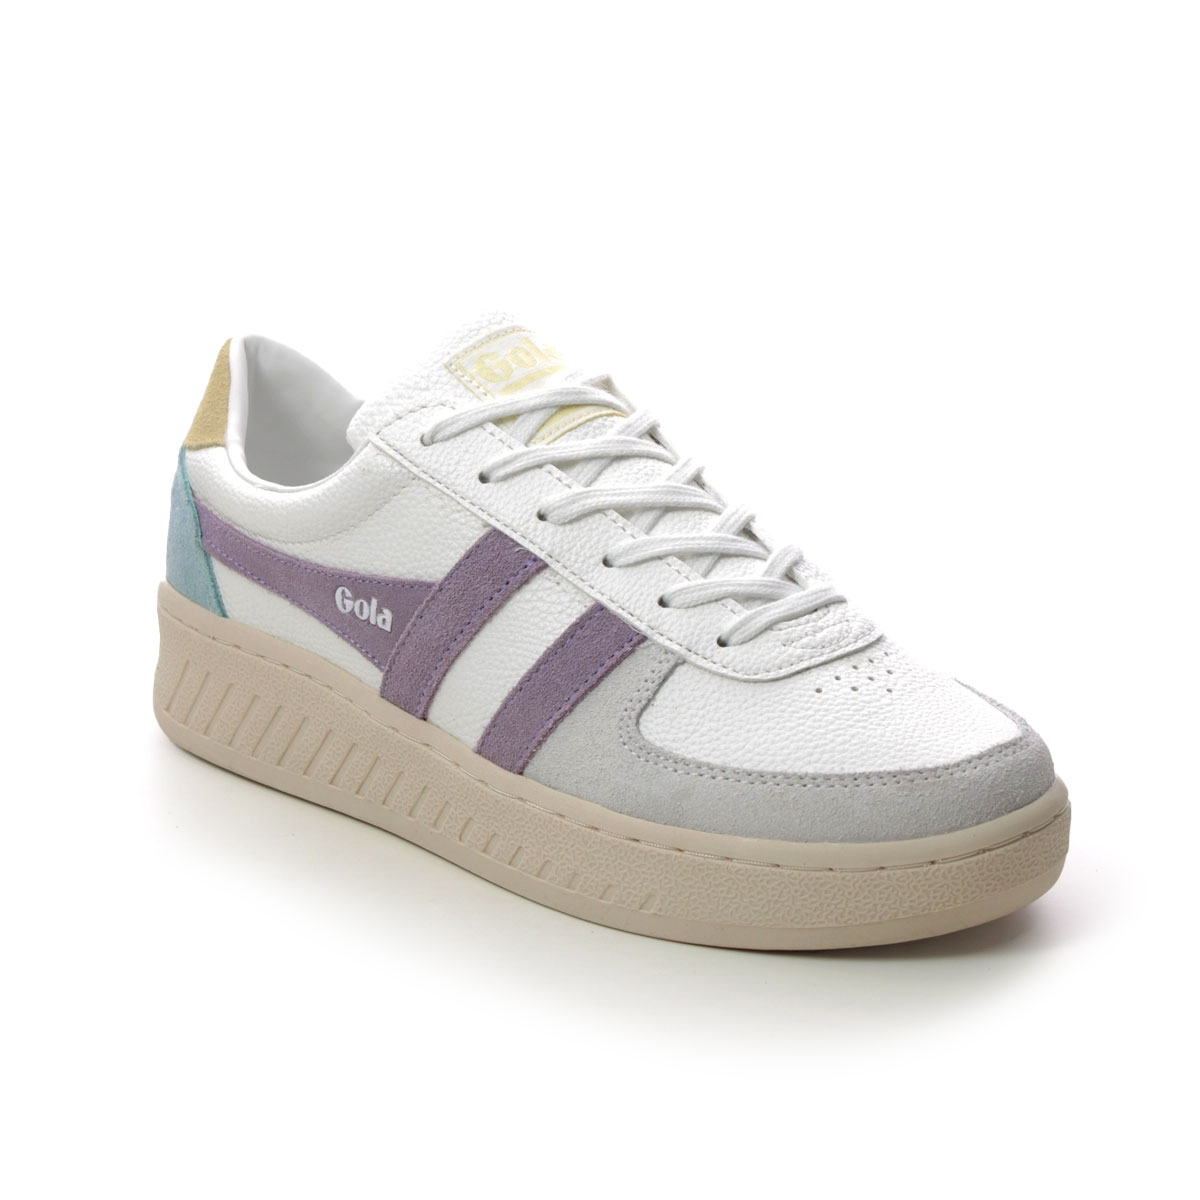 Gola Grandslam W White Womens trainers CLA415-WL in a Plain Leather and Man-made in Size 5